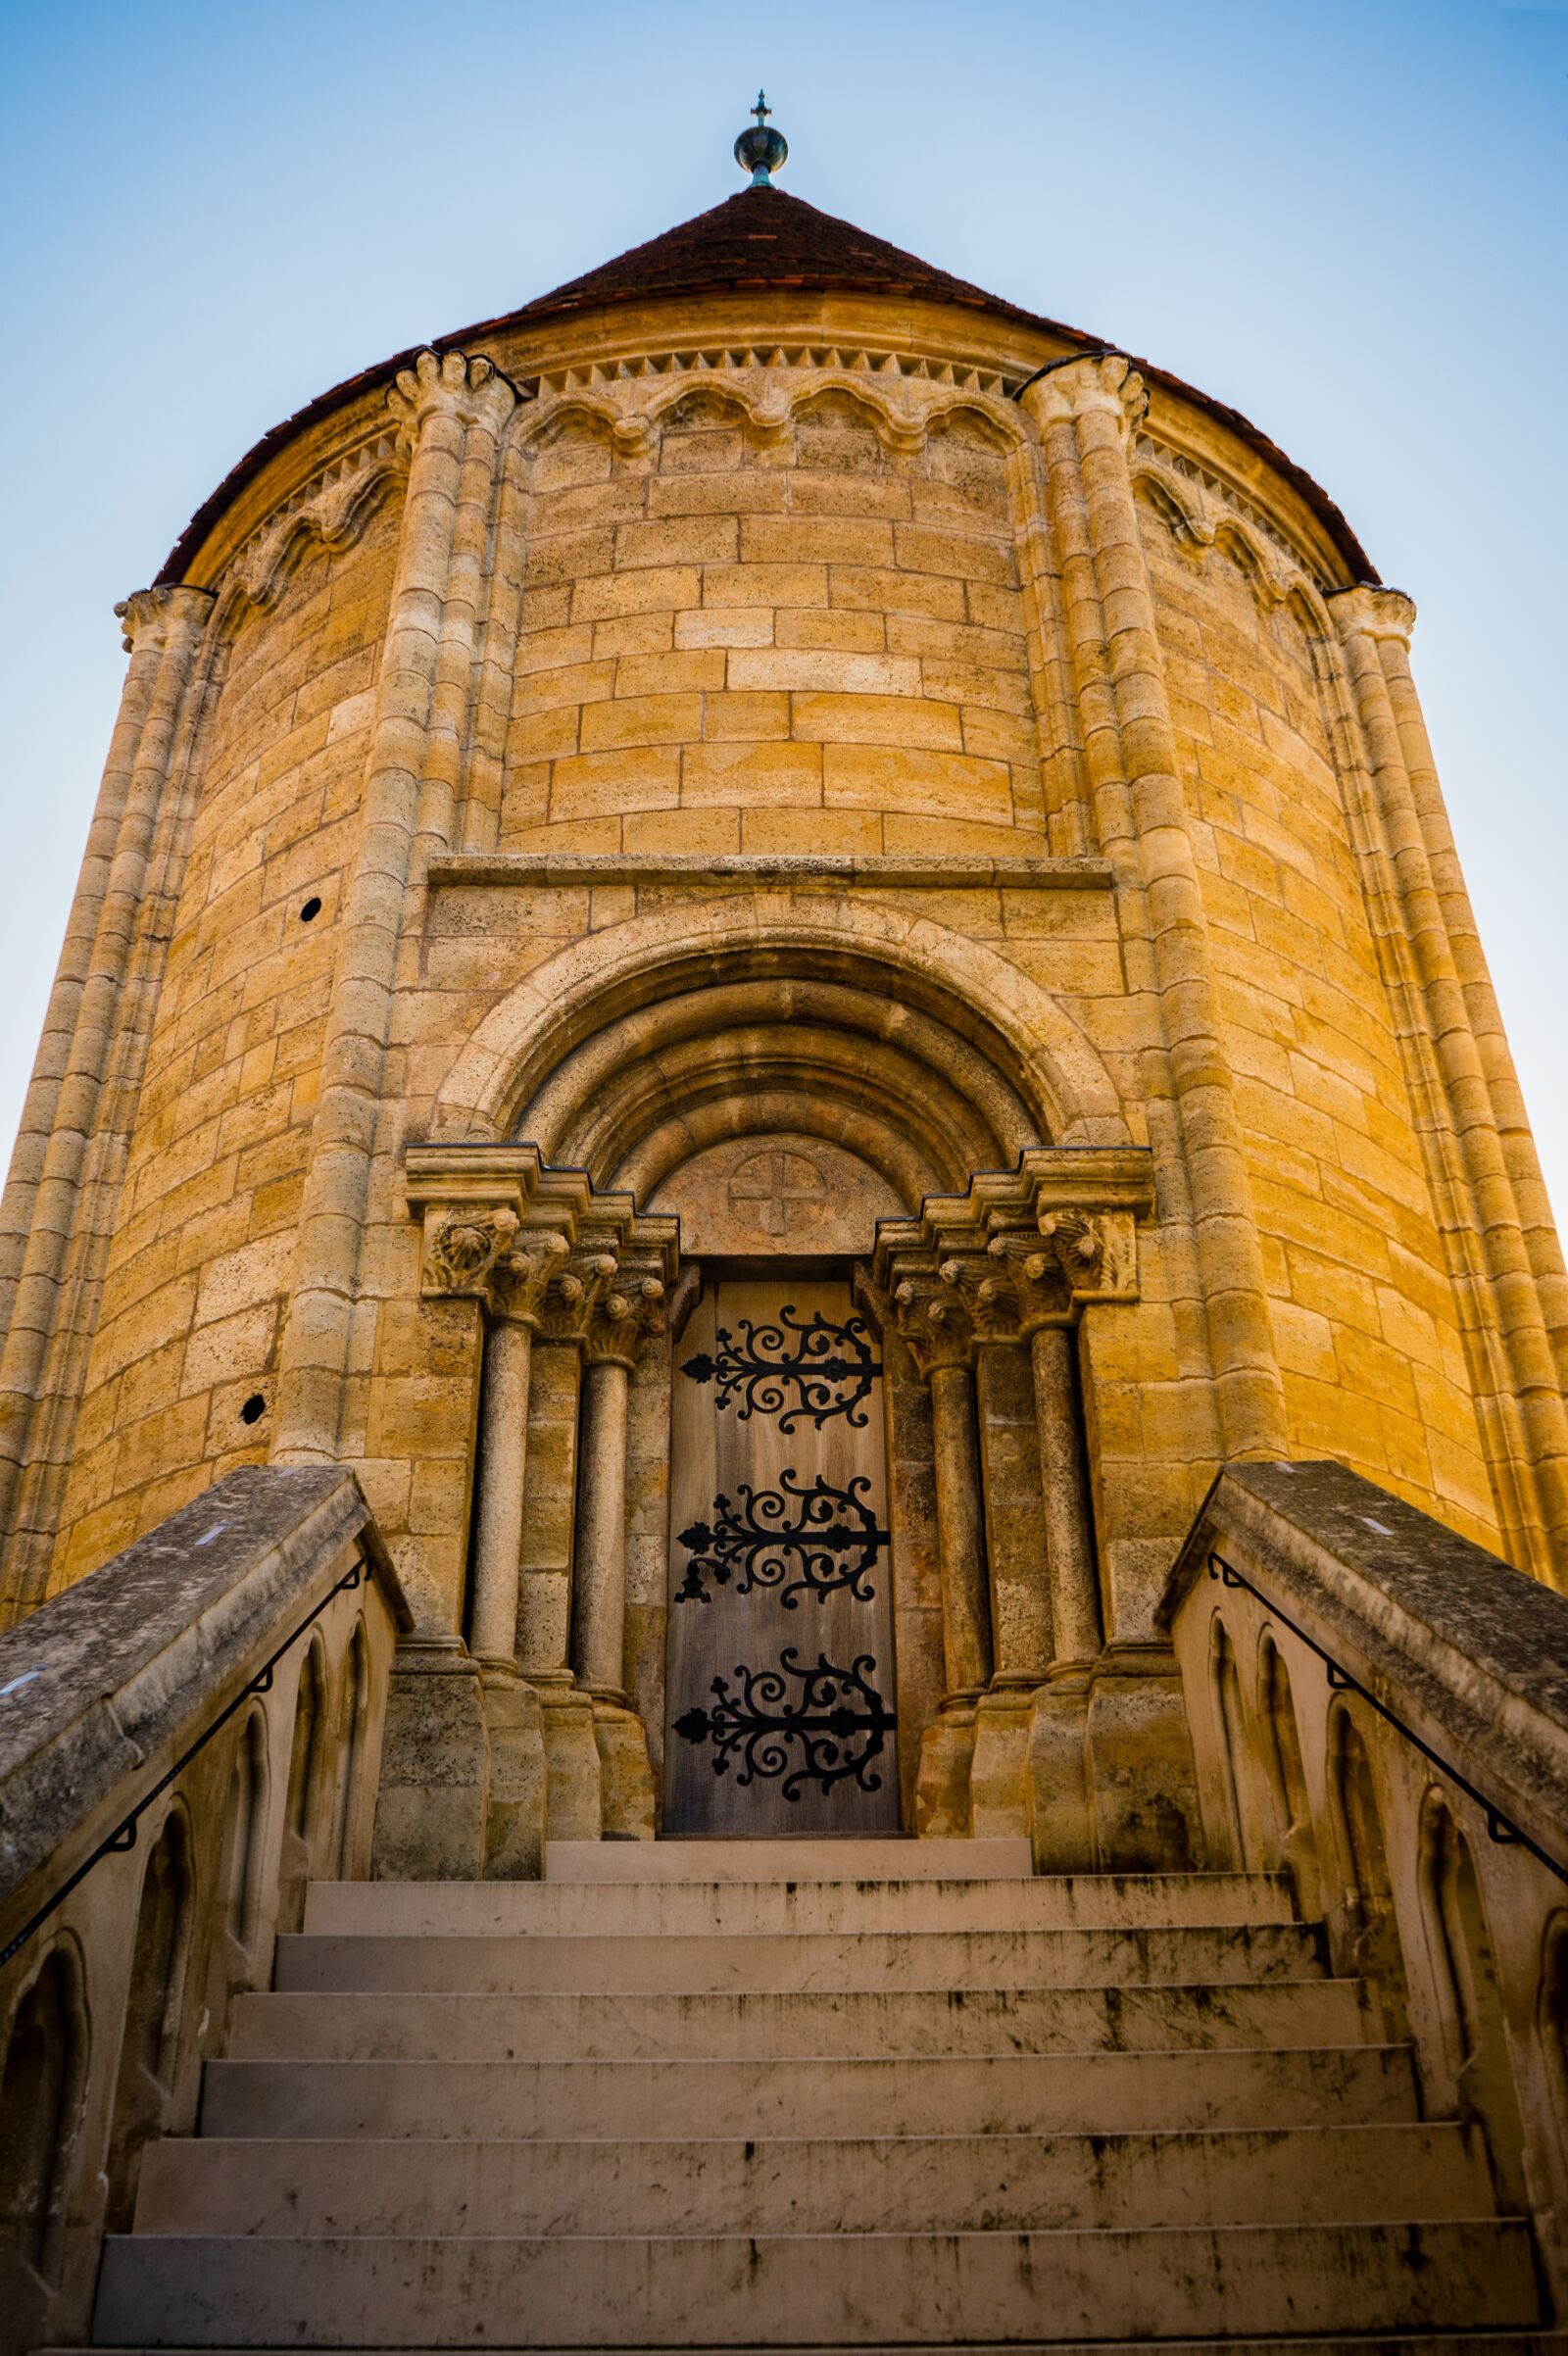 Sony a7 II + Sony FE 28-70mm F3.5-5.6 OSS sample photo. Tower, church, architecture photography